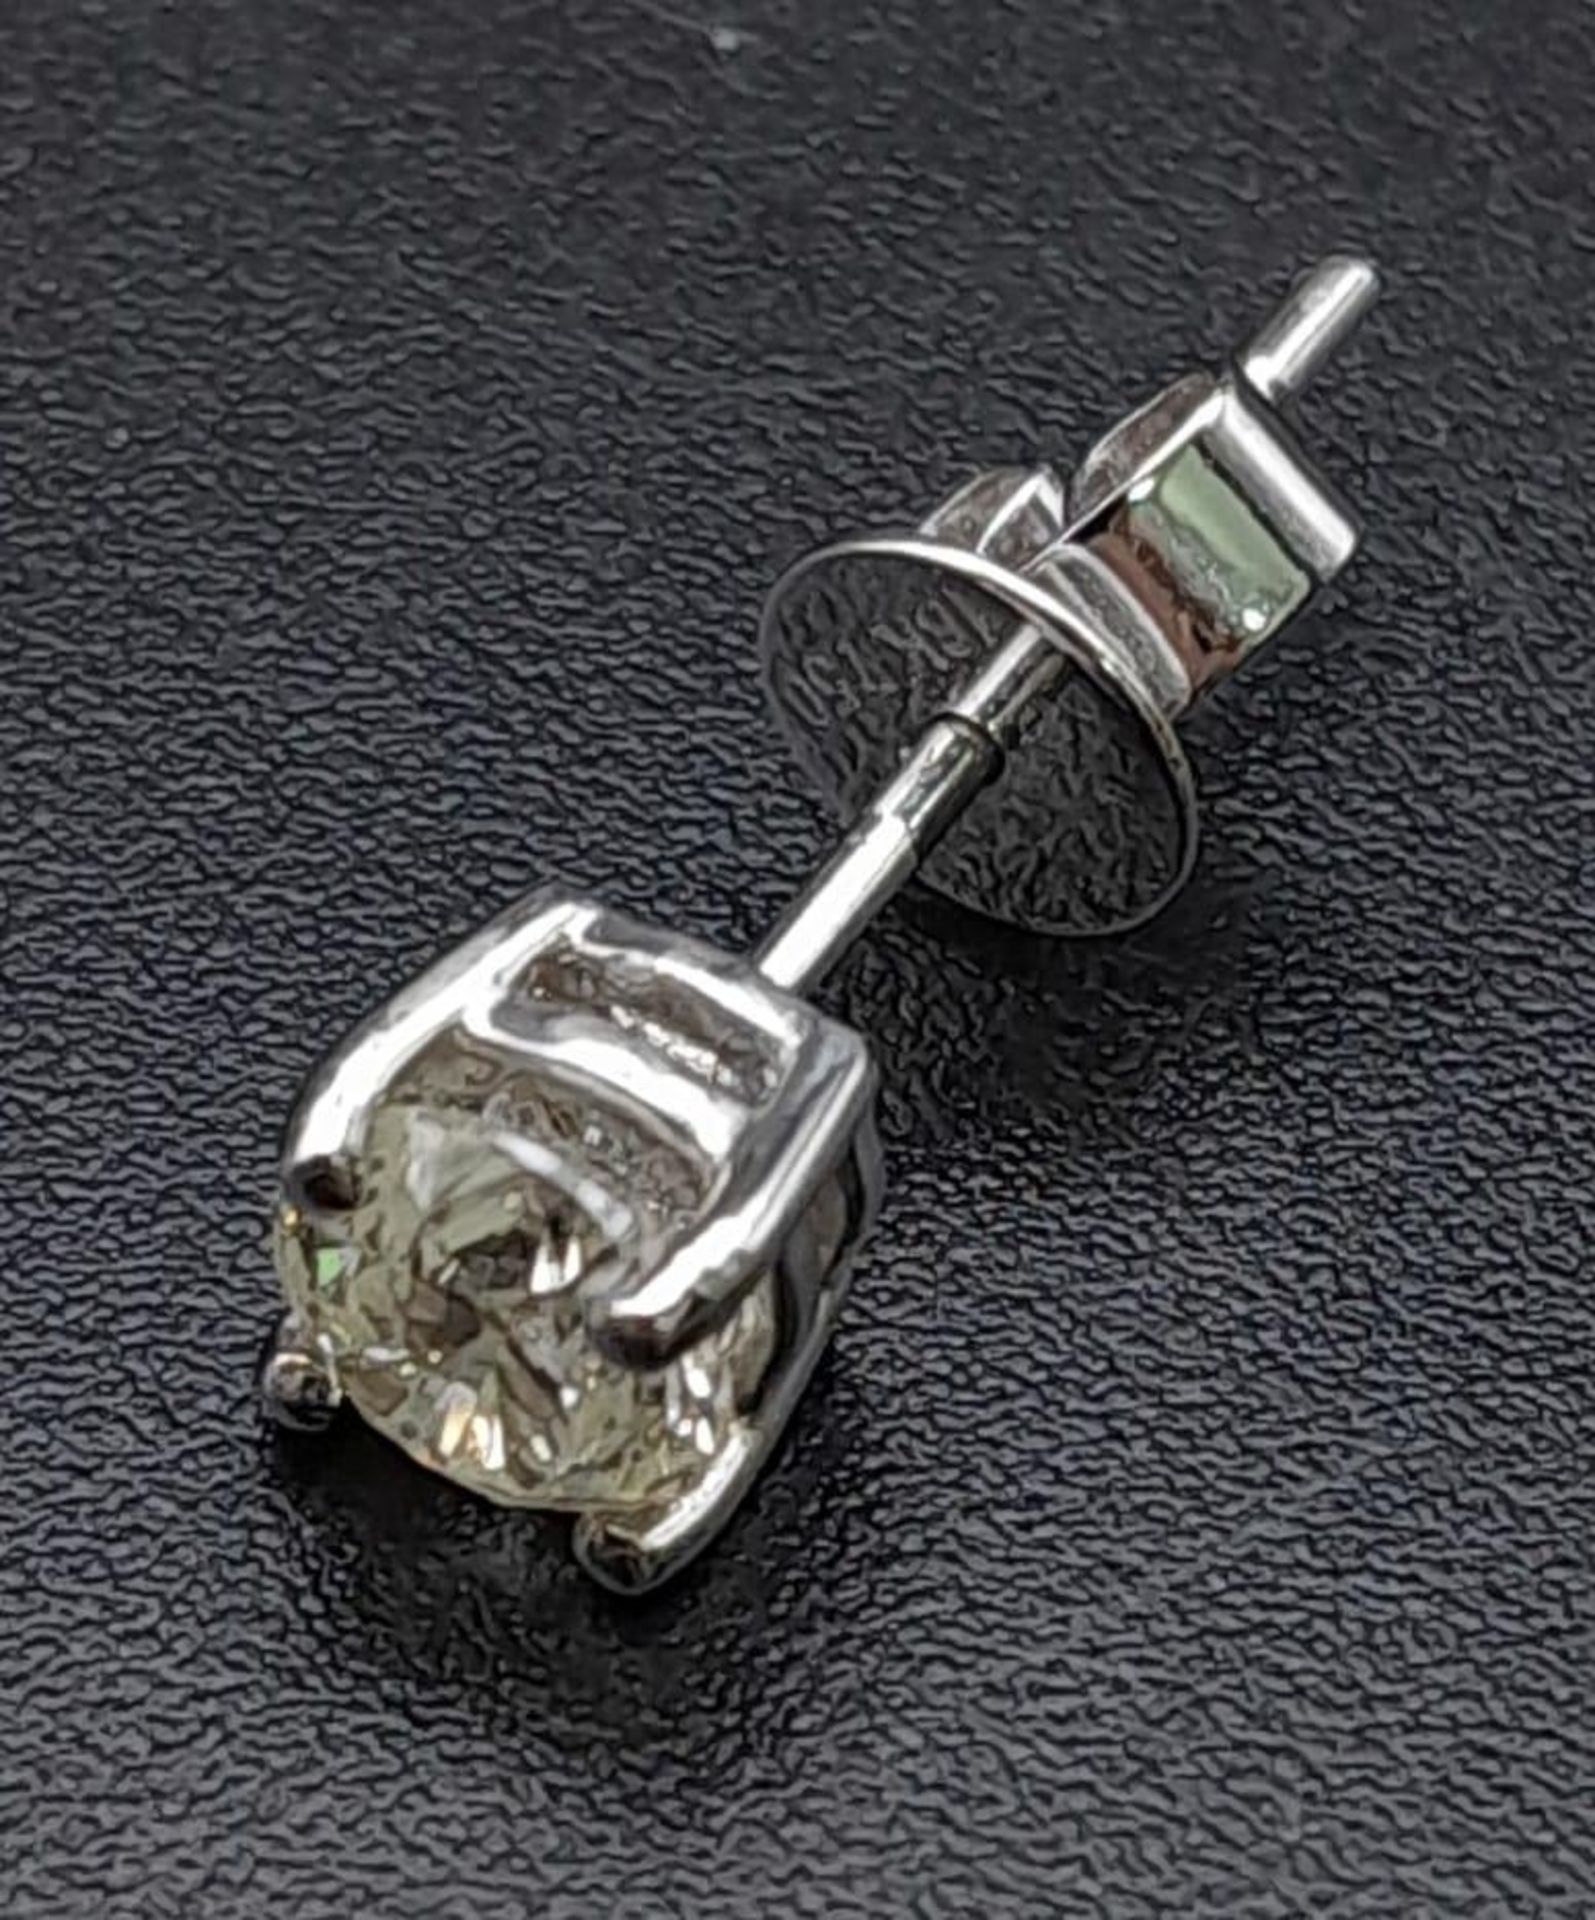 AN 18K WHITE GOLD SINGLE DIAMOND SOLITAIRE STUD EARRING. 4.9MM LONG. TOTAL WEIGHT APPROX 0.82 GRAMS.